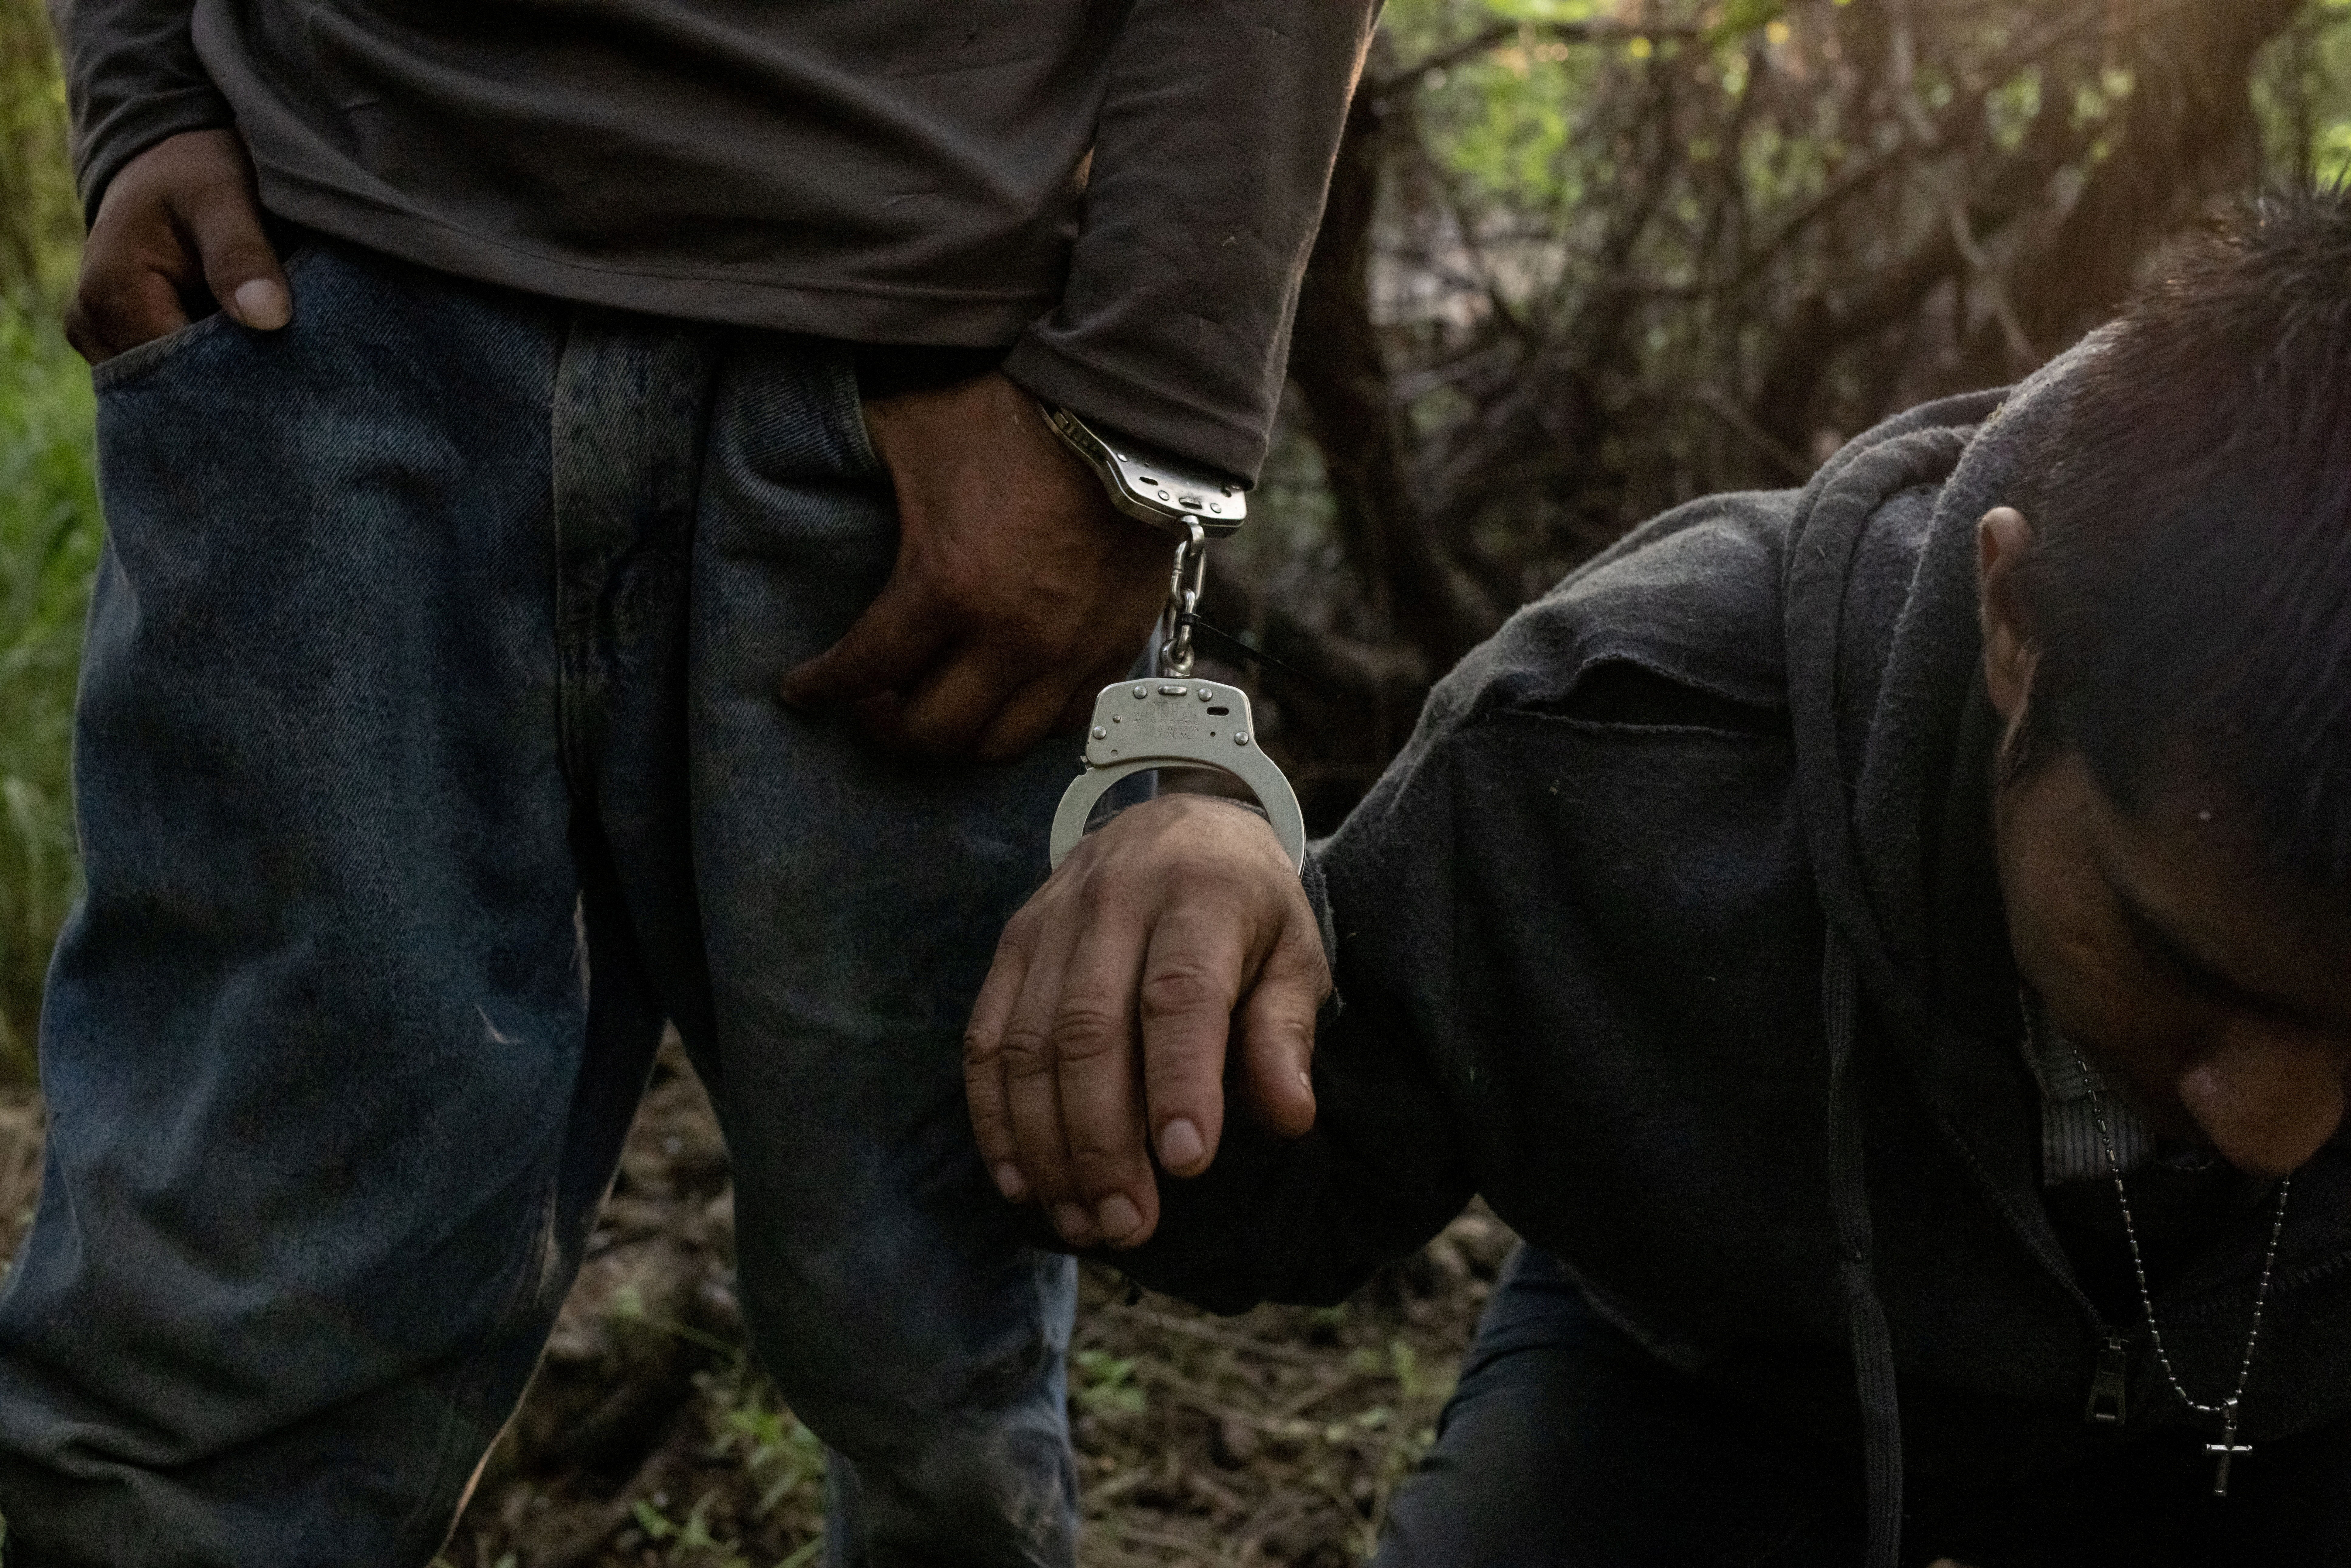 Migrant from Guatemala sits handcuffed after crossing into Texas from Mexico